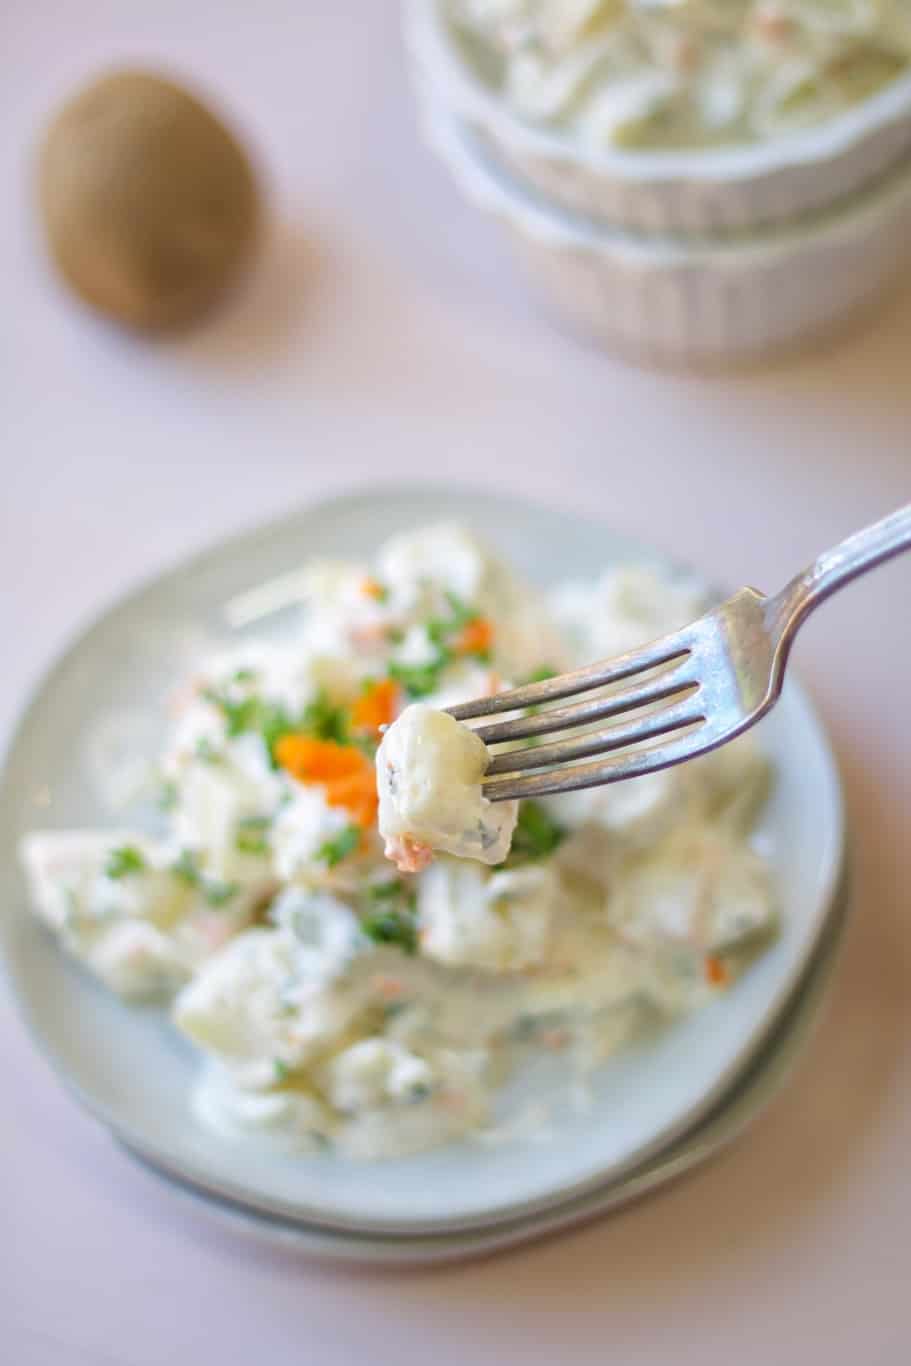 a bite a potato salad with creamy delicious mayo dressing